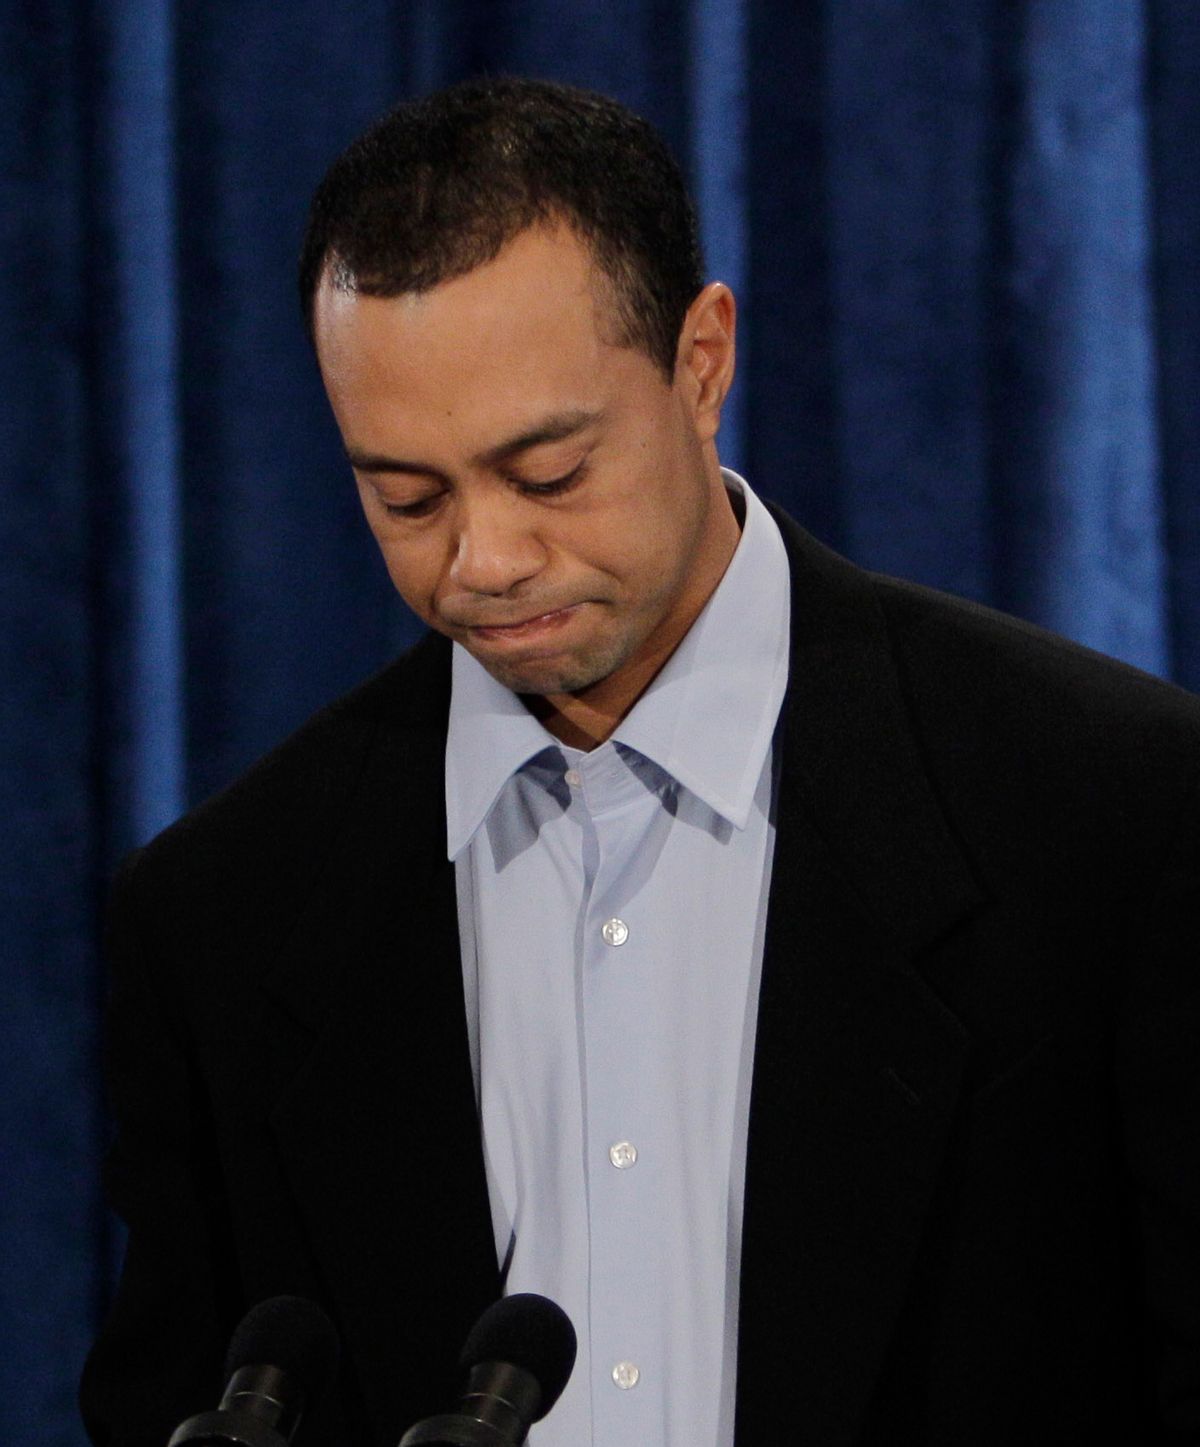 Tiger Woods during a news conference in, Friday, Feb. 19, 2010, in Ponte Vedra Beach, Fla. (AP Photo/Eric Gay)   (Associated Press)